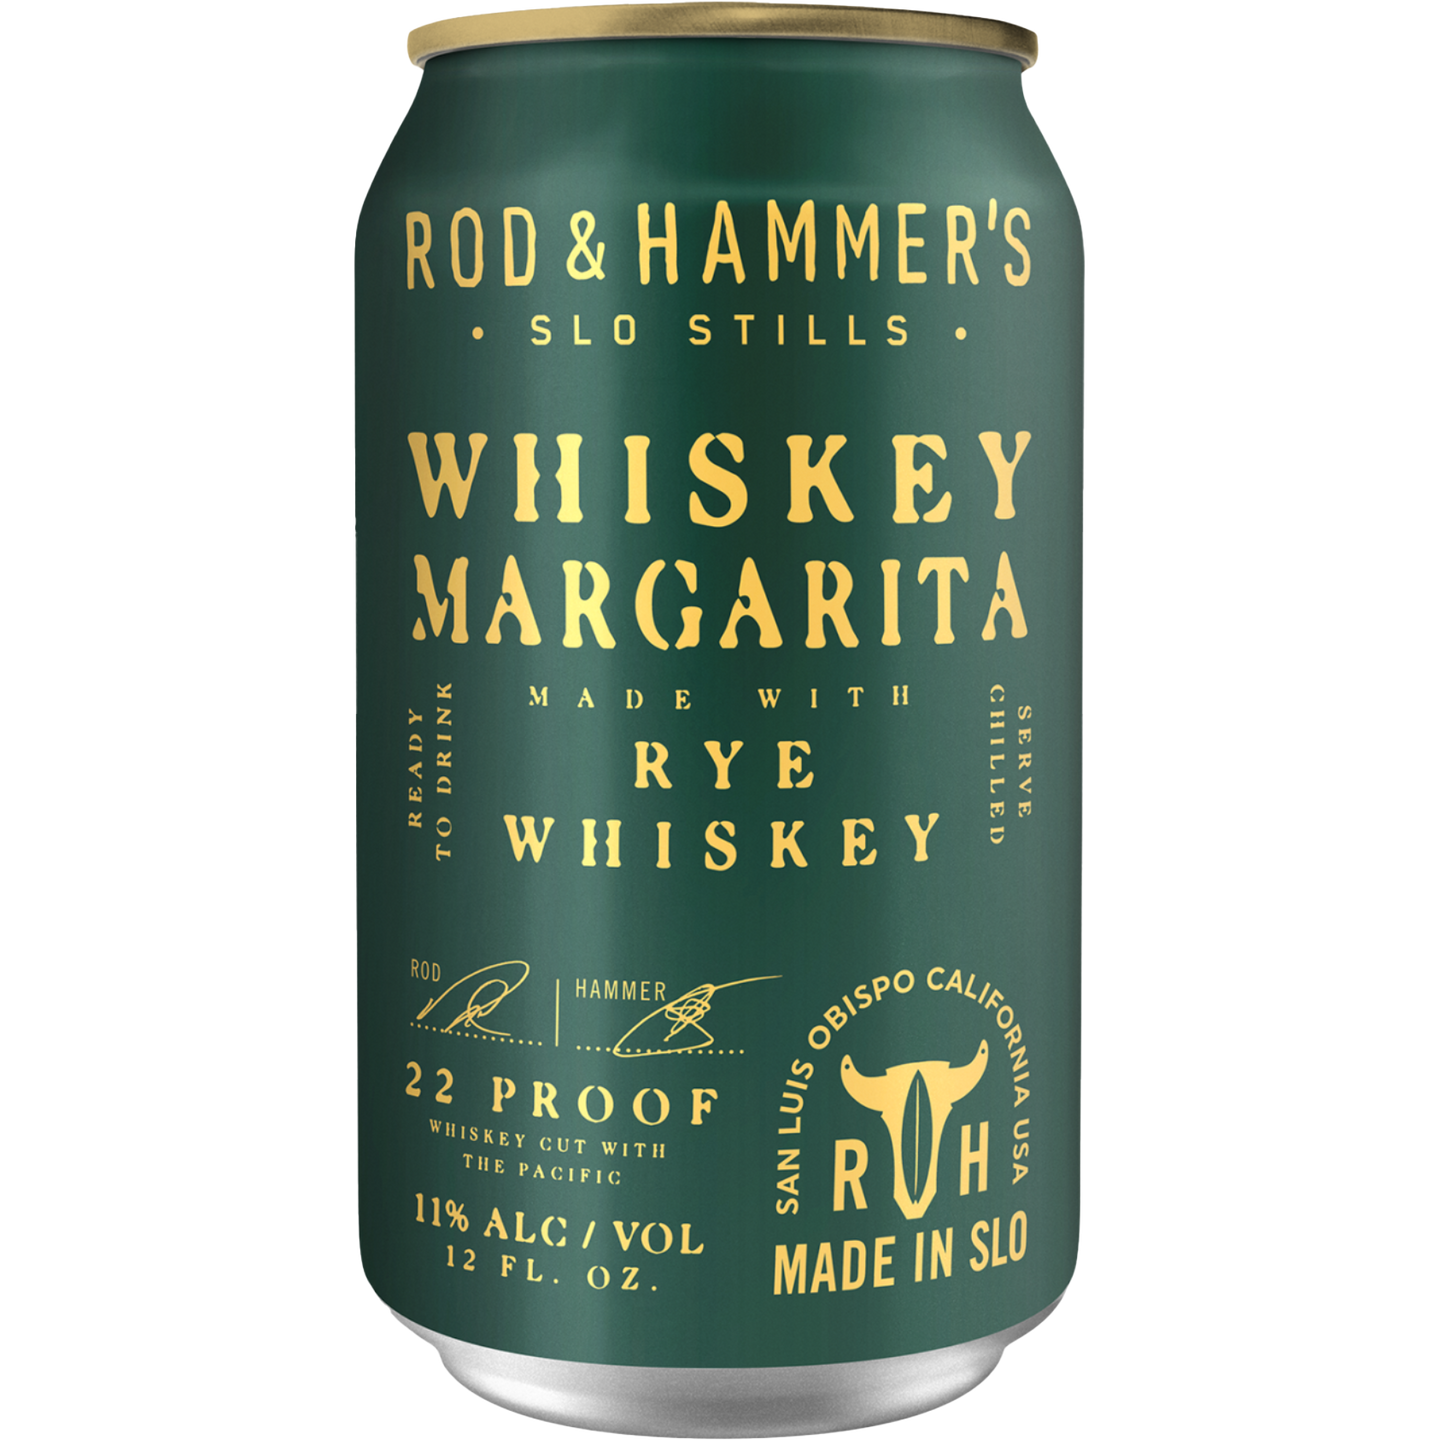 Rod & Hammer's Canned Cocktails